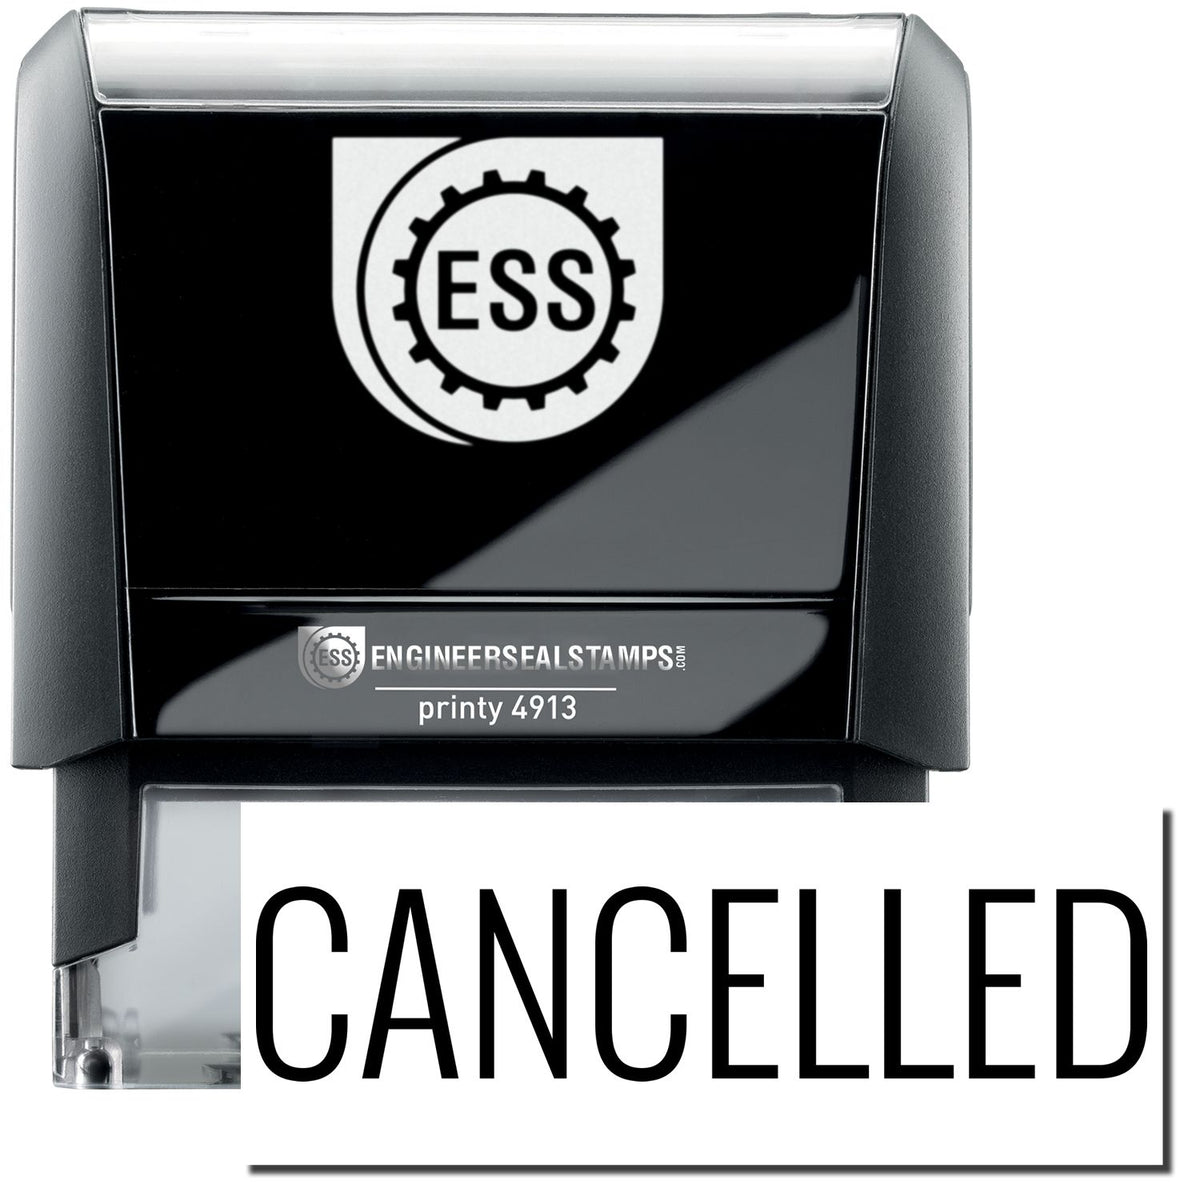 A self-inking stamp with a stamped image showing how the text &quot;CANCELLED&quot; in a large narrow font is displayed by it after stamping.